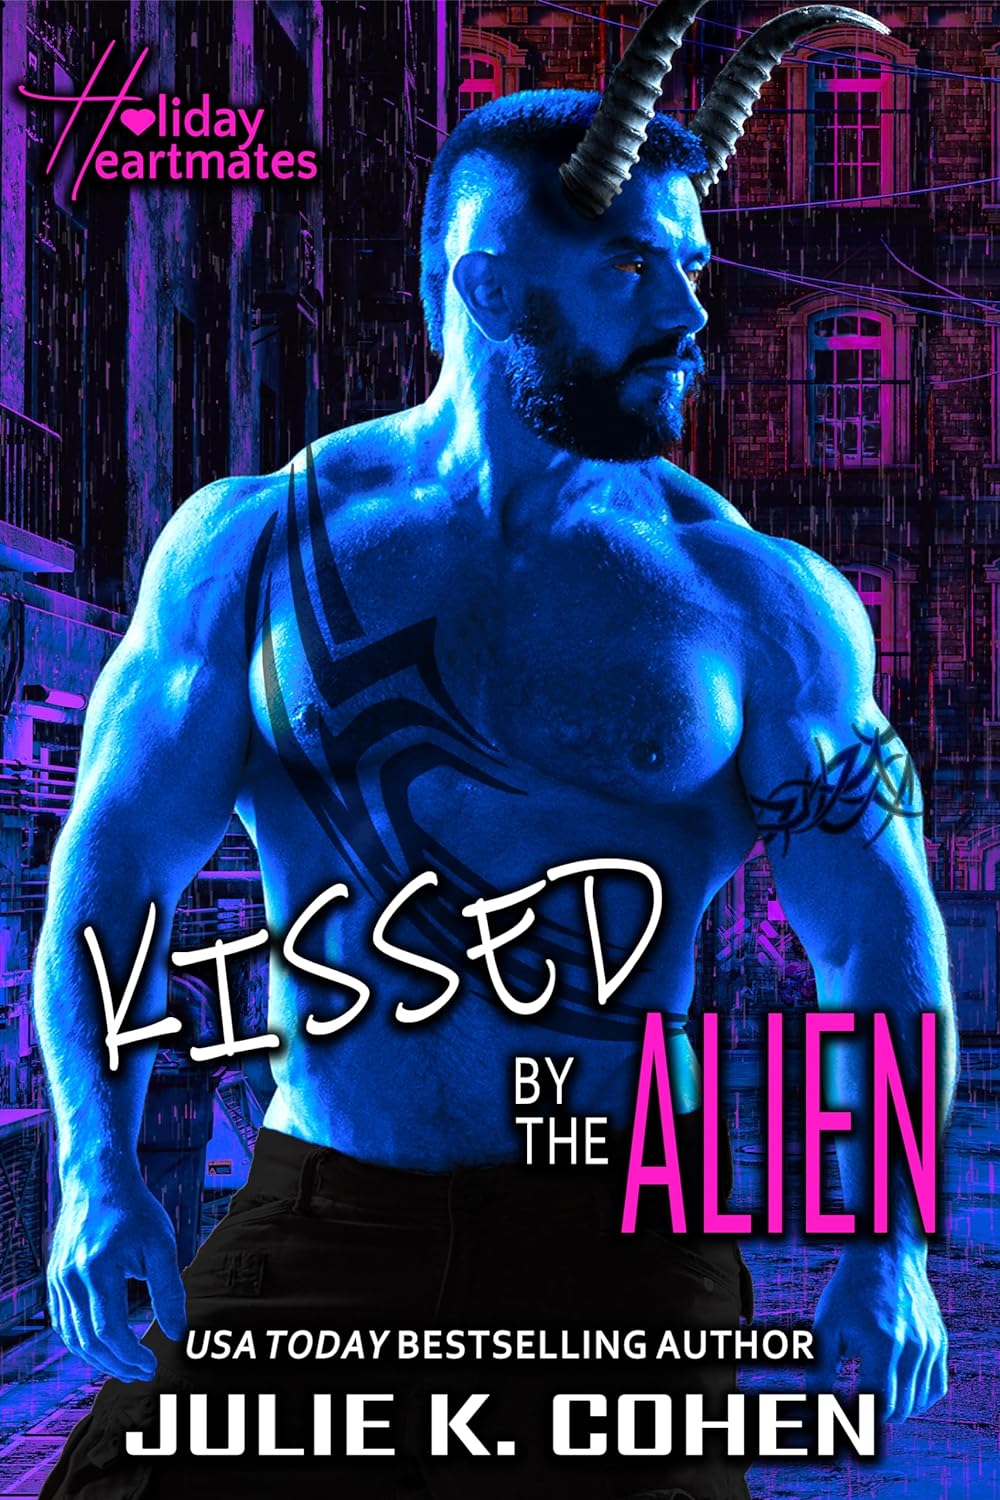 Kissed by the Alien by Julie K. Cohen